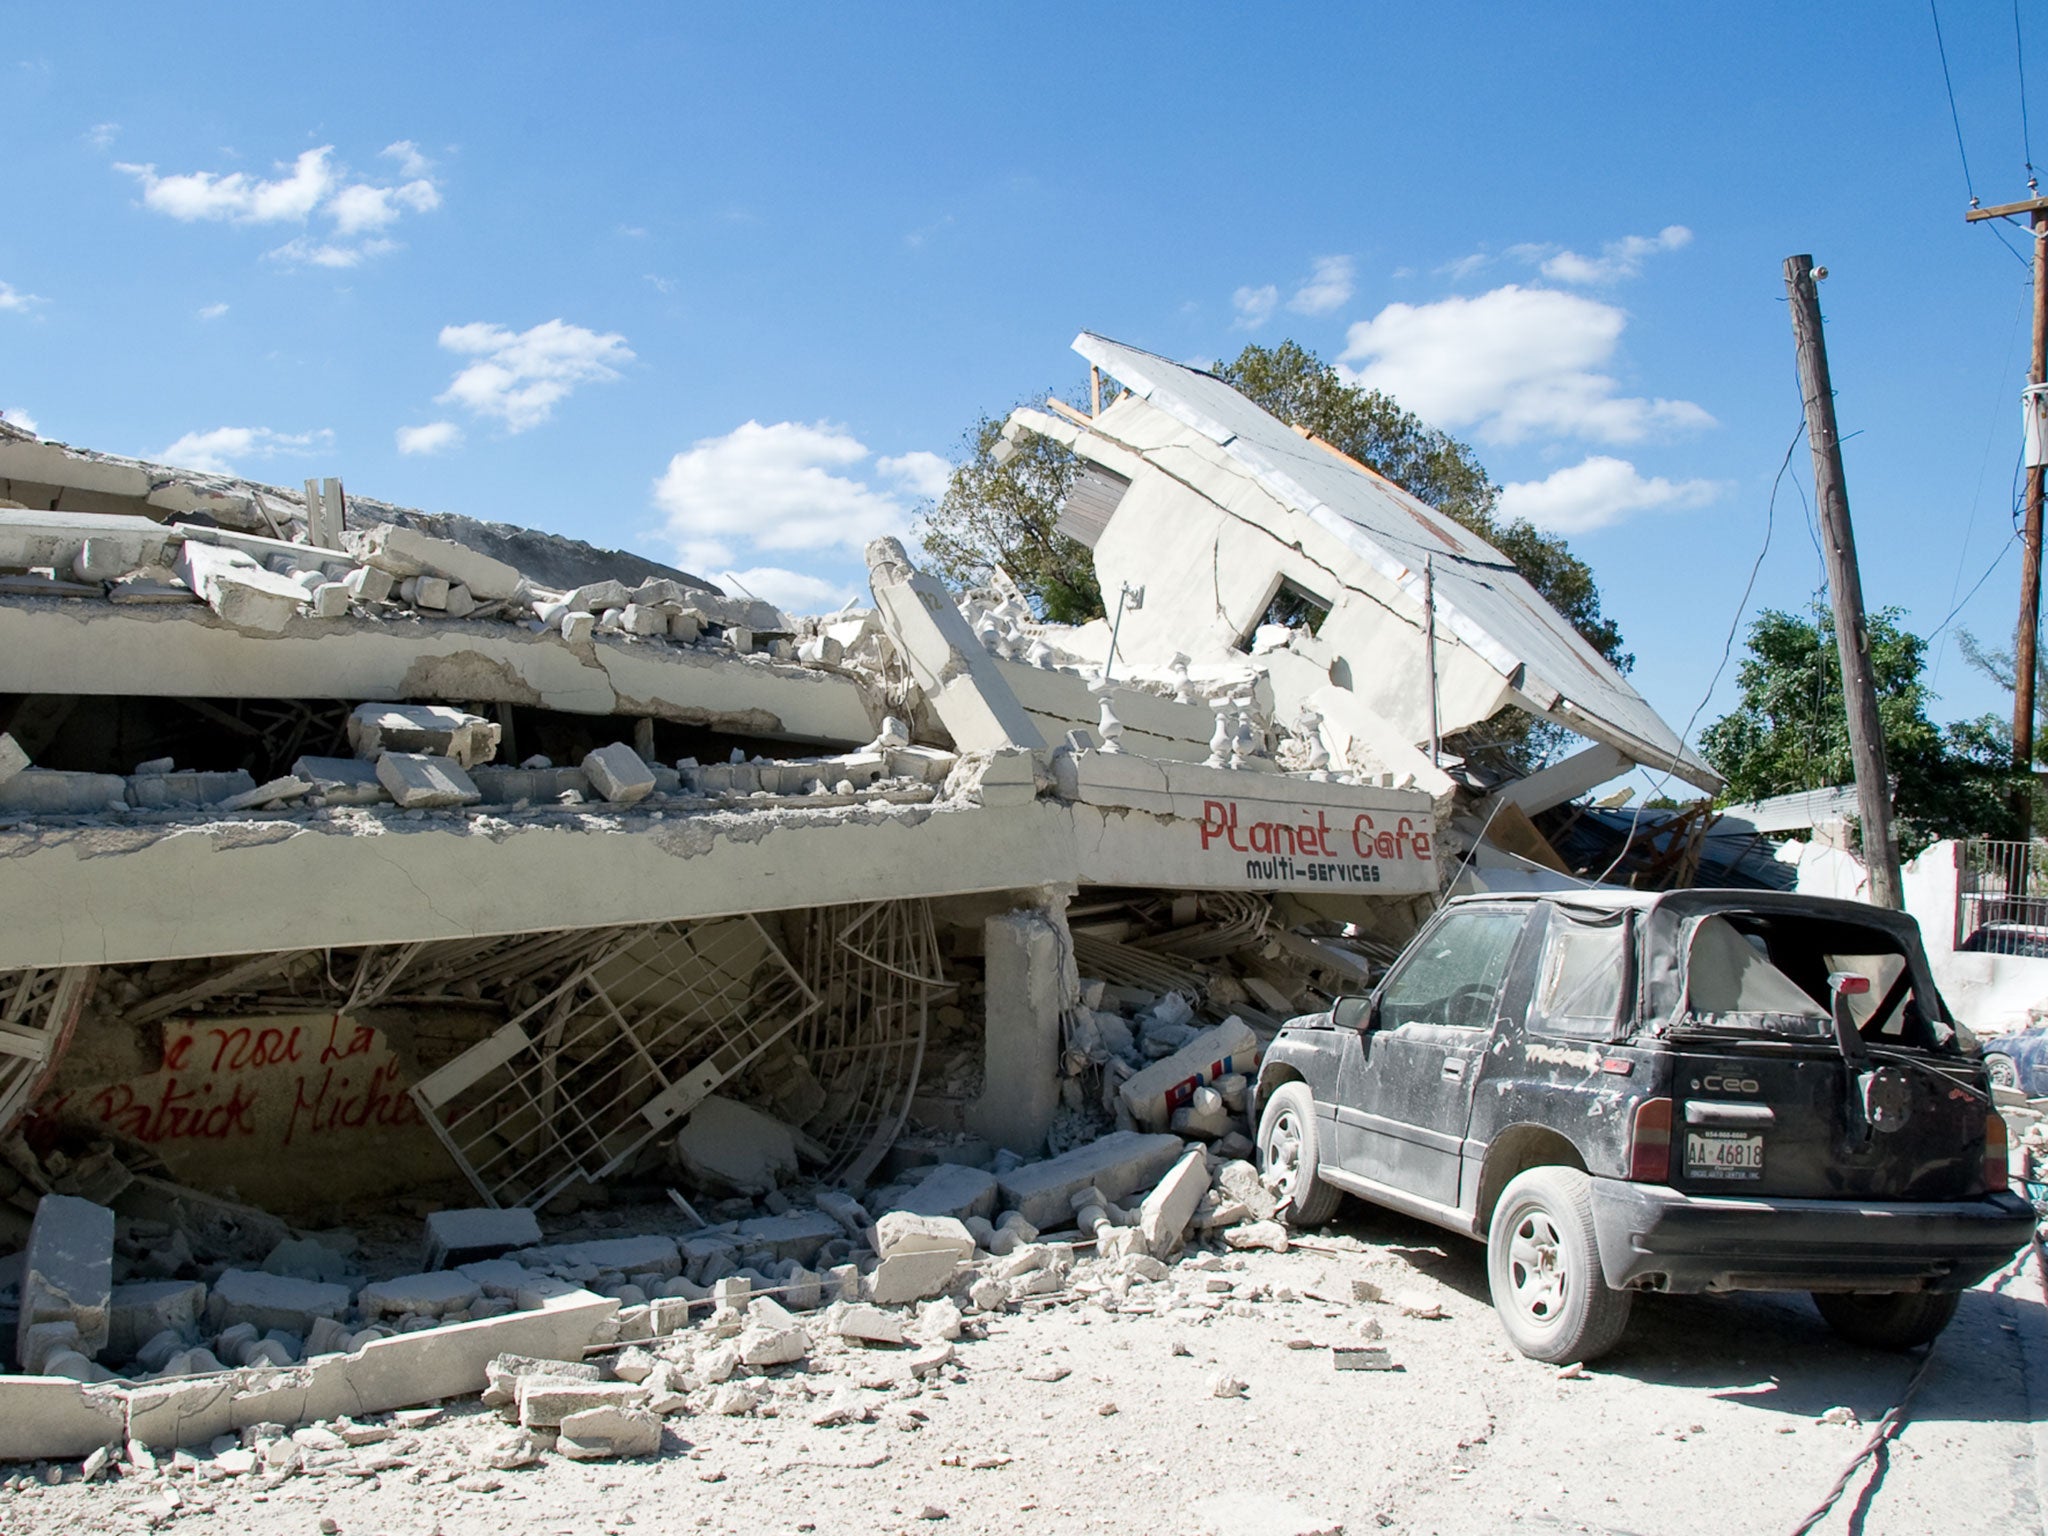 The aftermath of the 2010 eathquake in Haiti